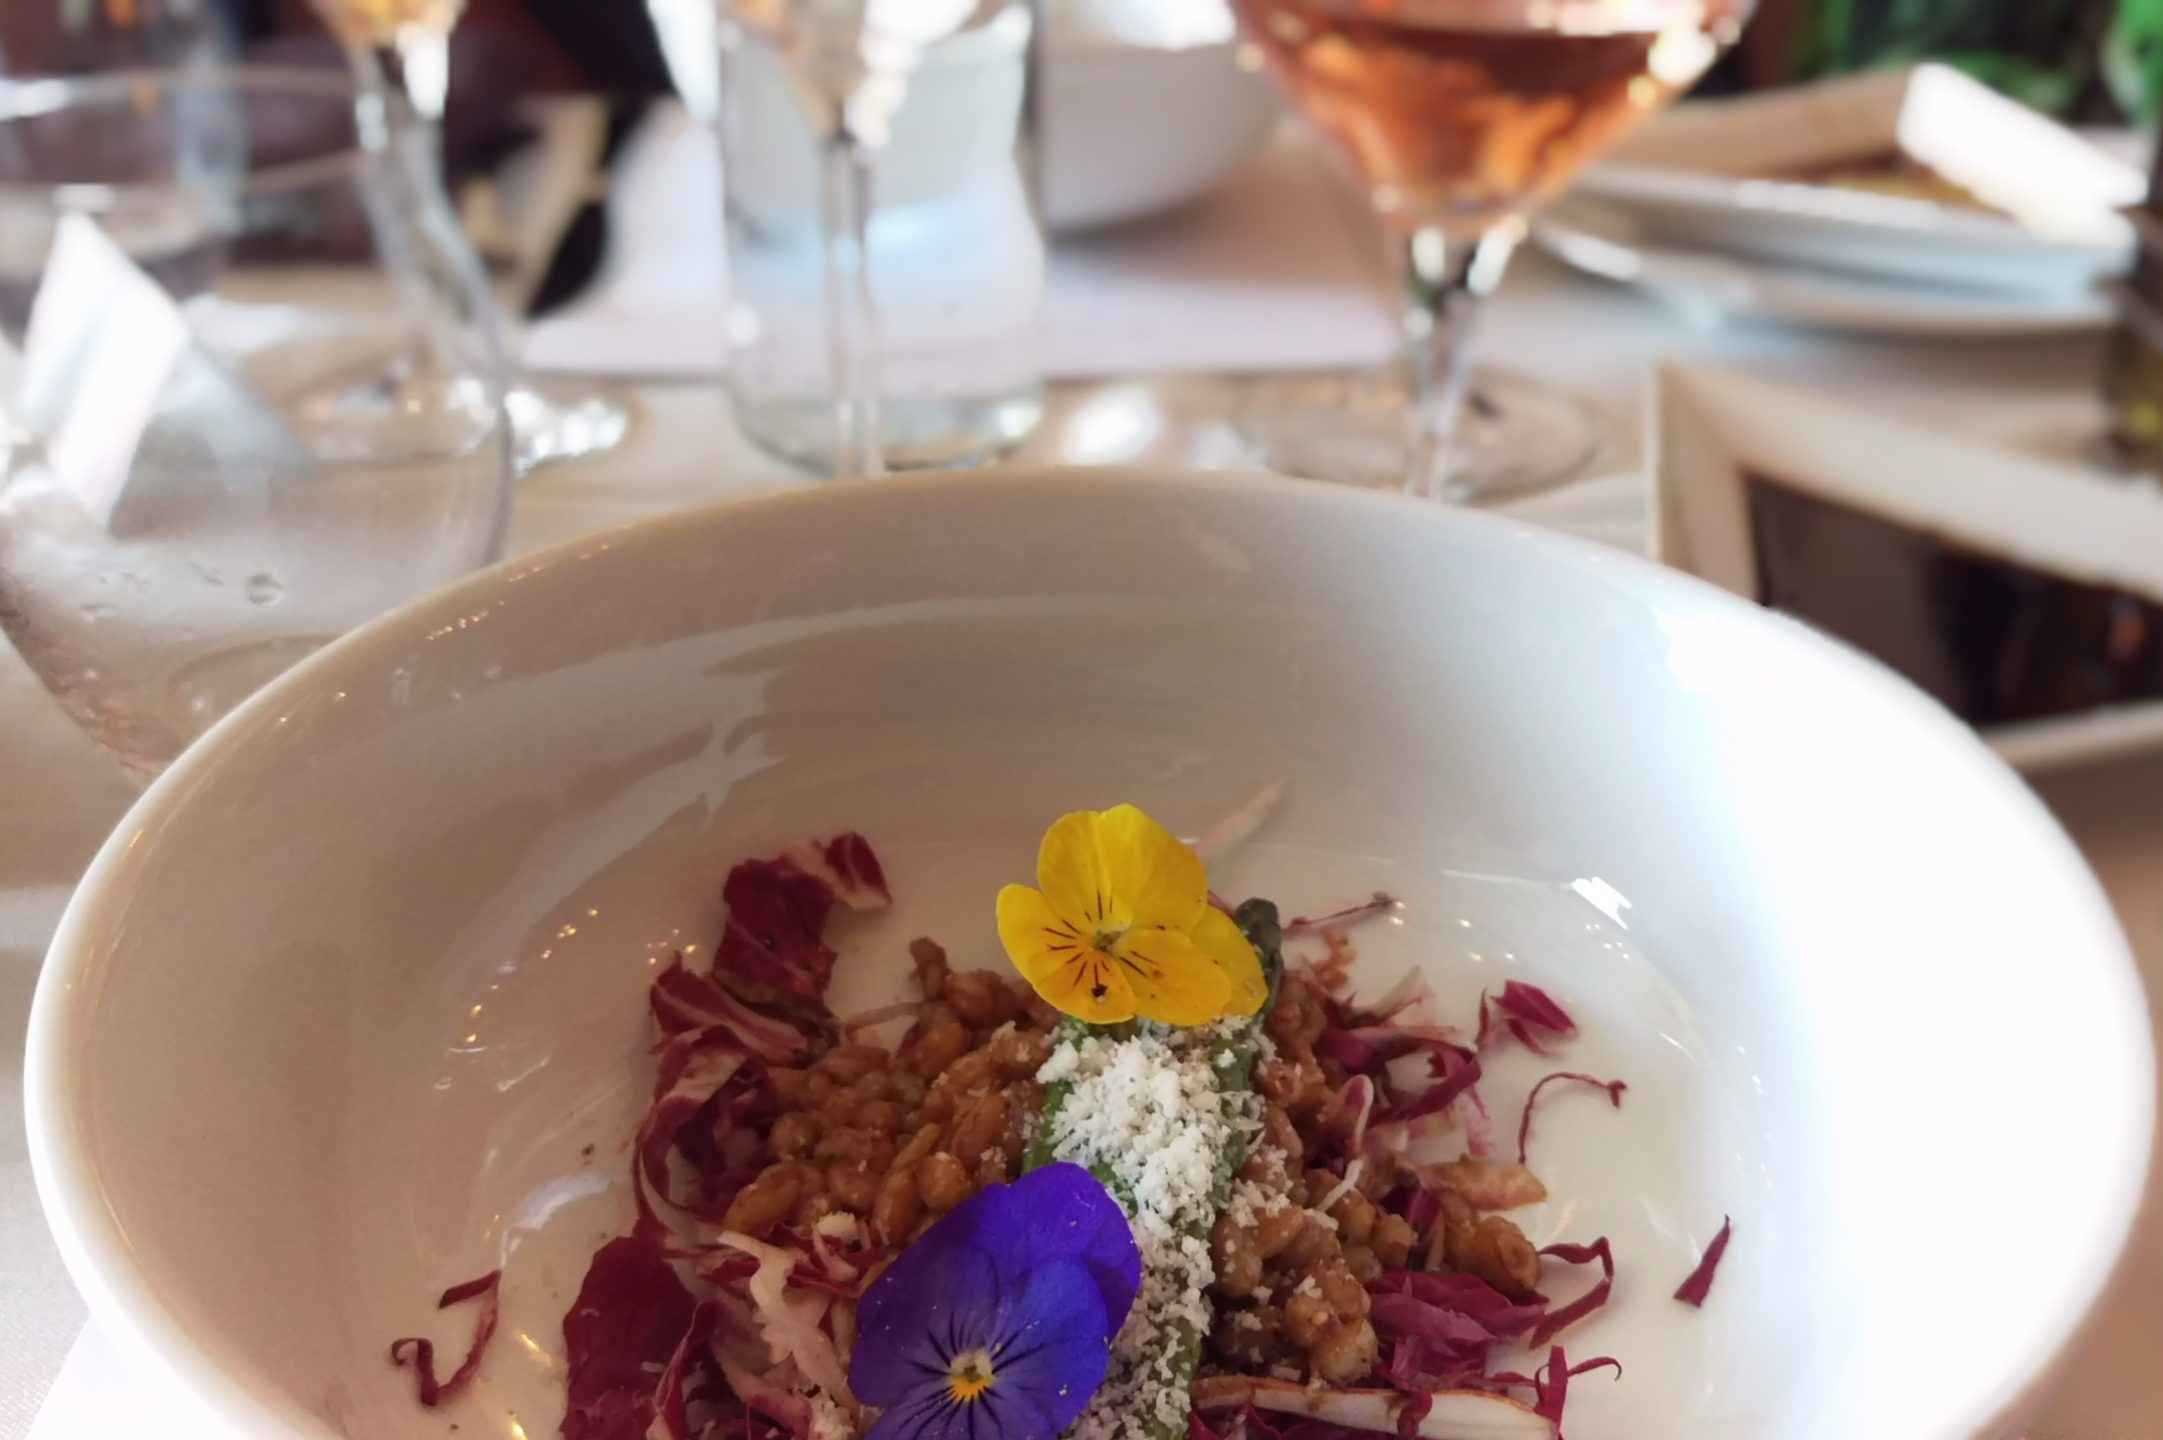 Starting course with edible flowers during Coleman Winemakers Dinner